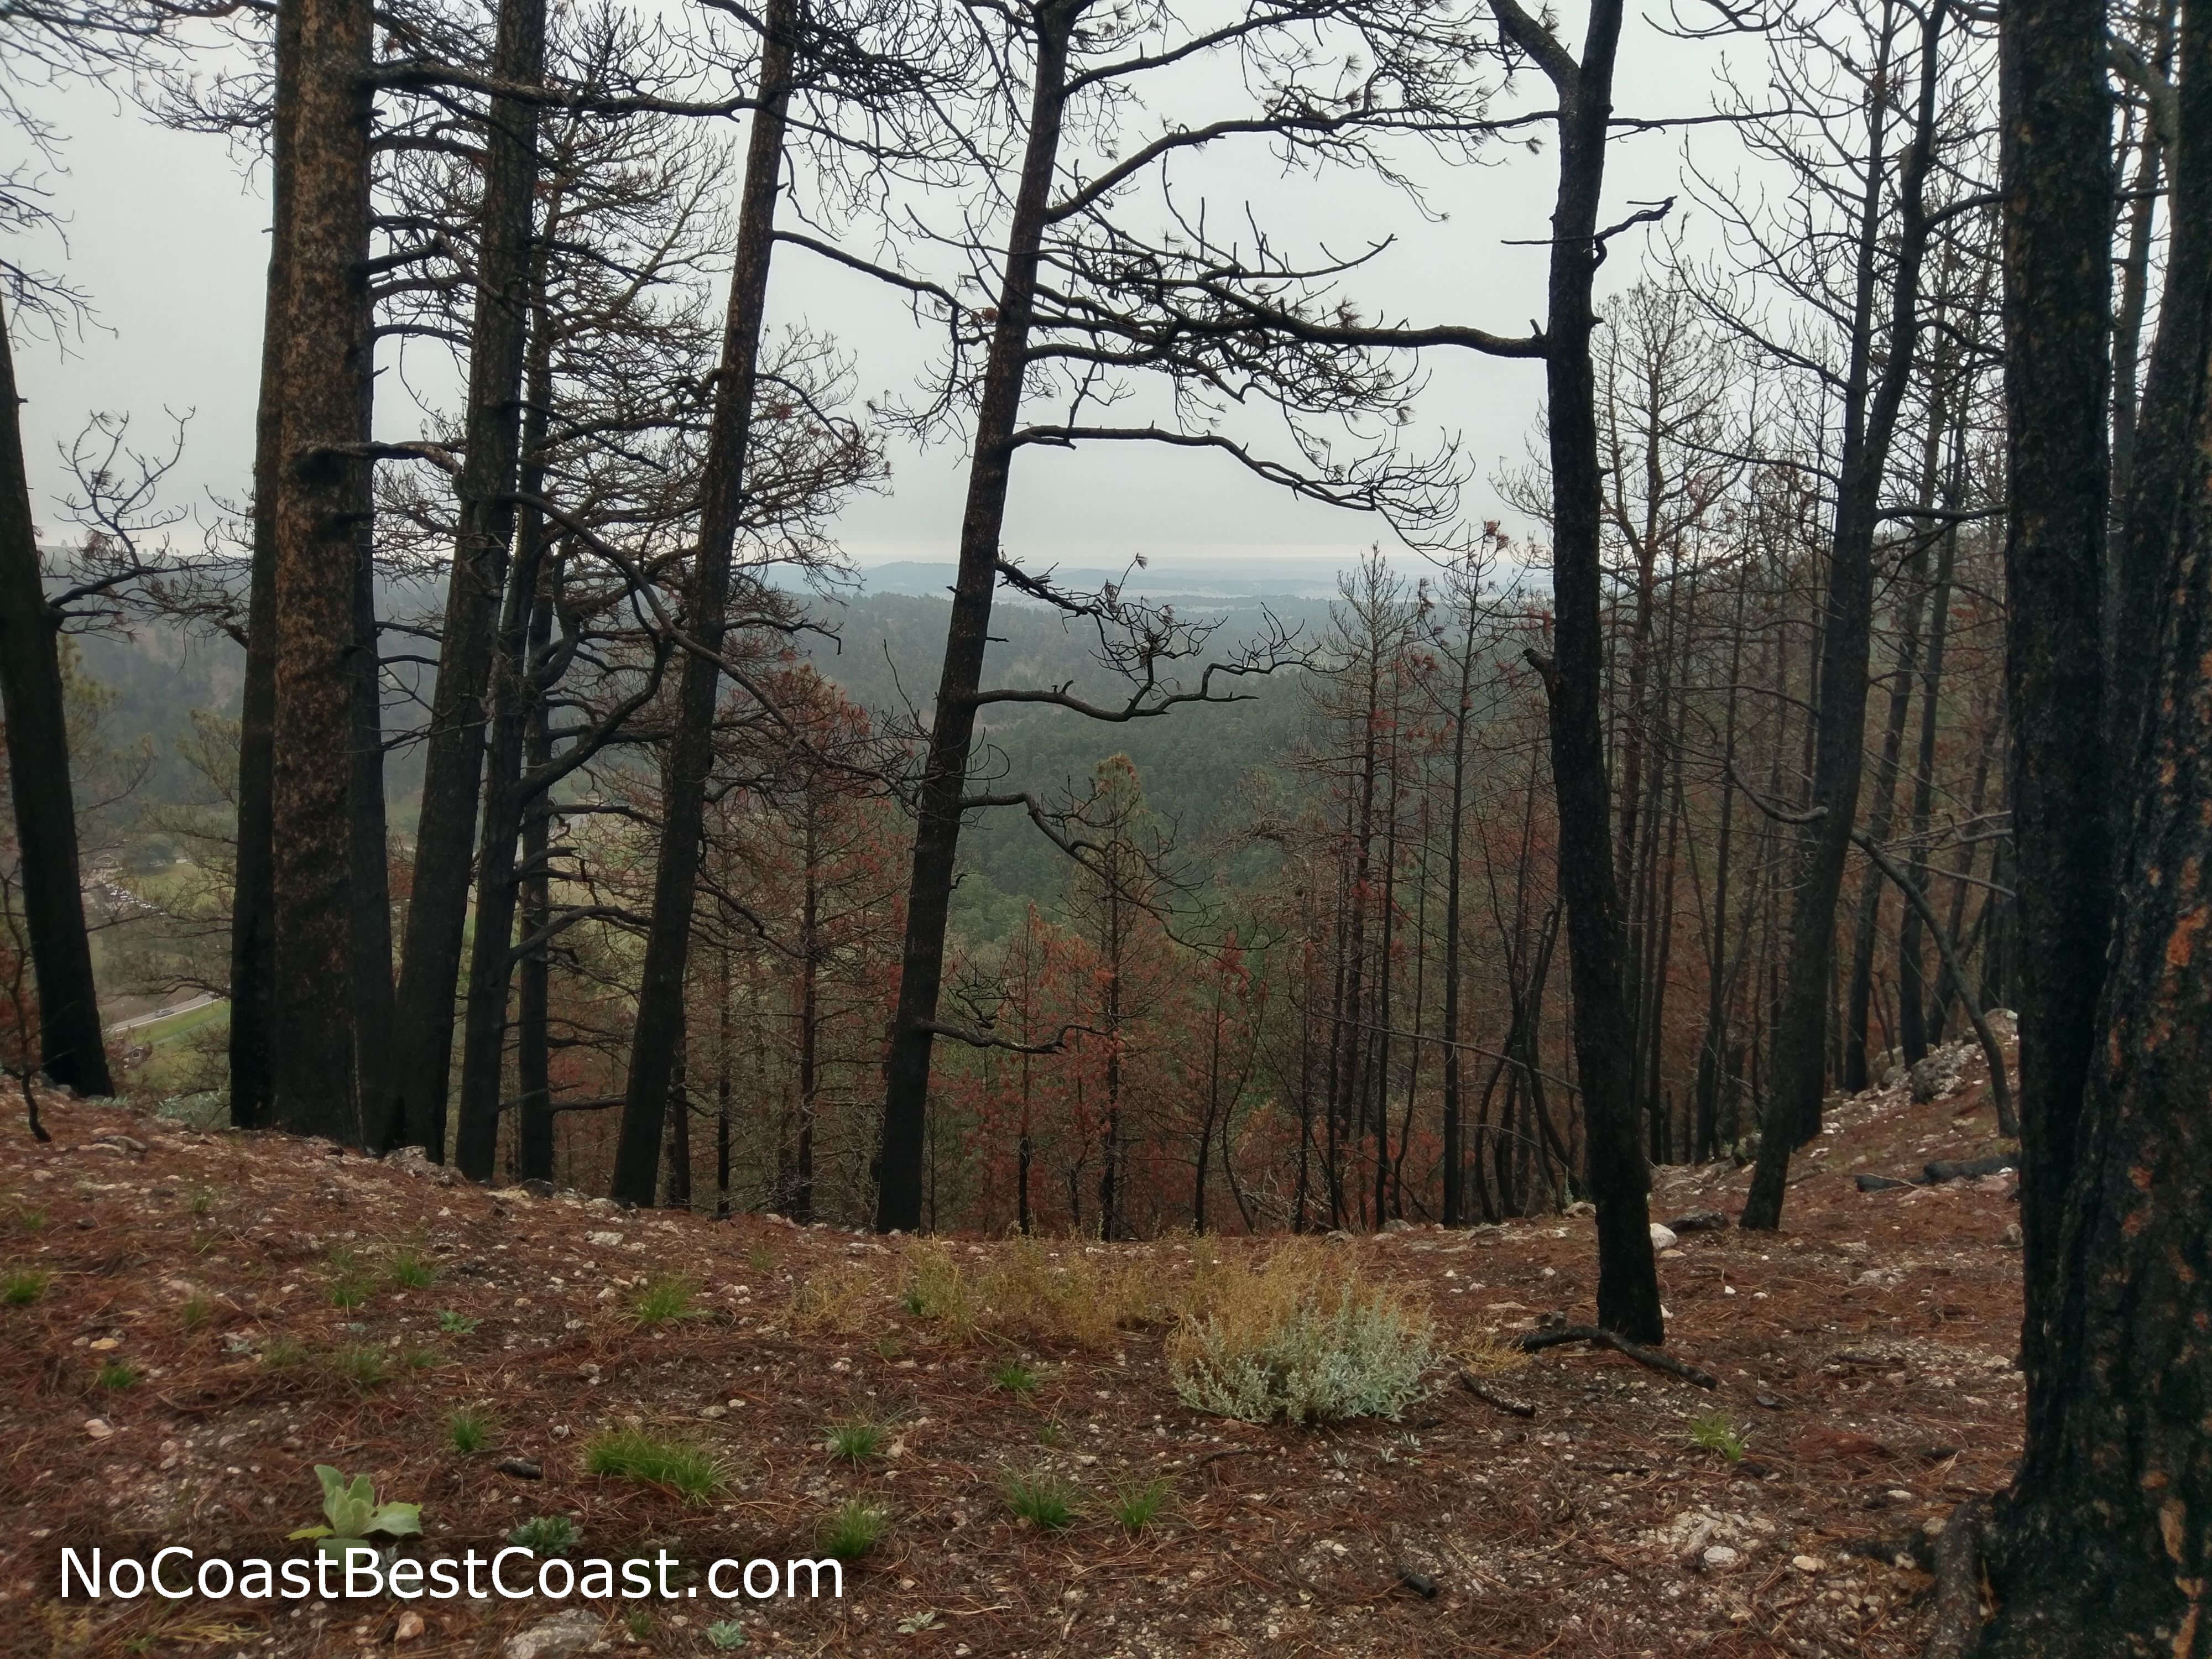 Views through the pine forest scarred by past fires